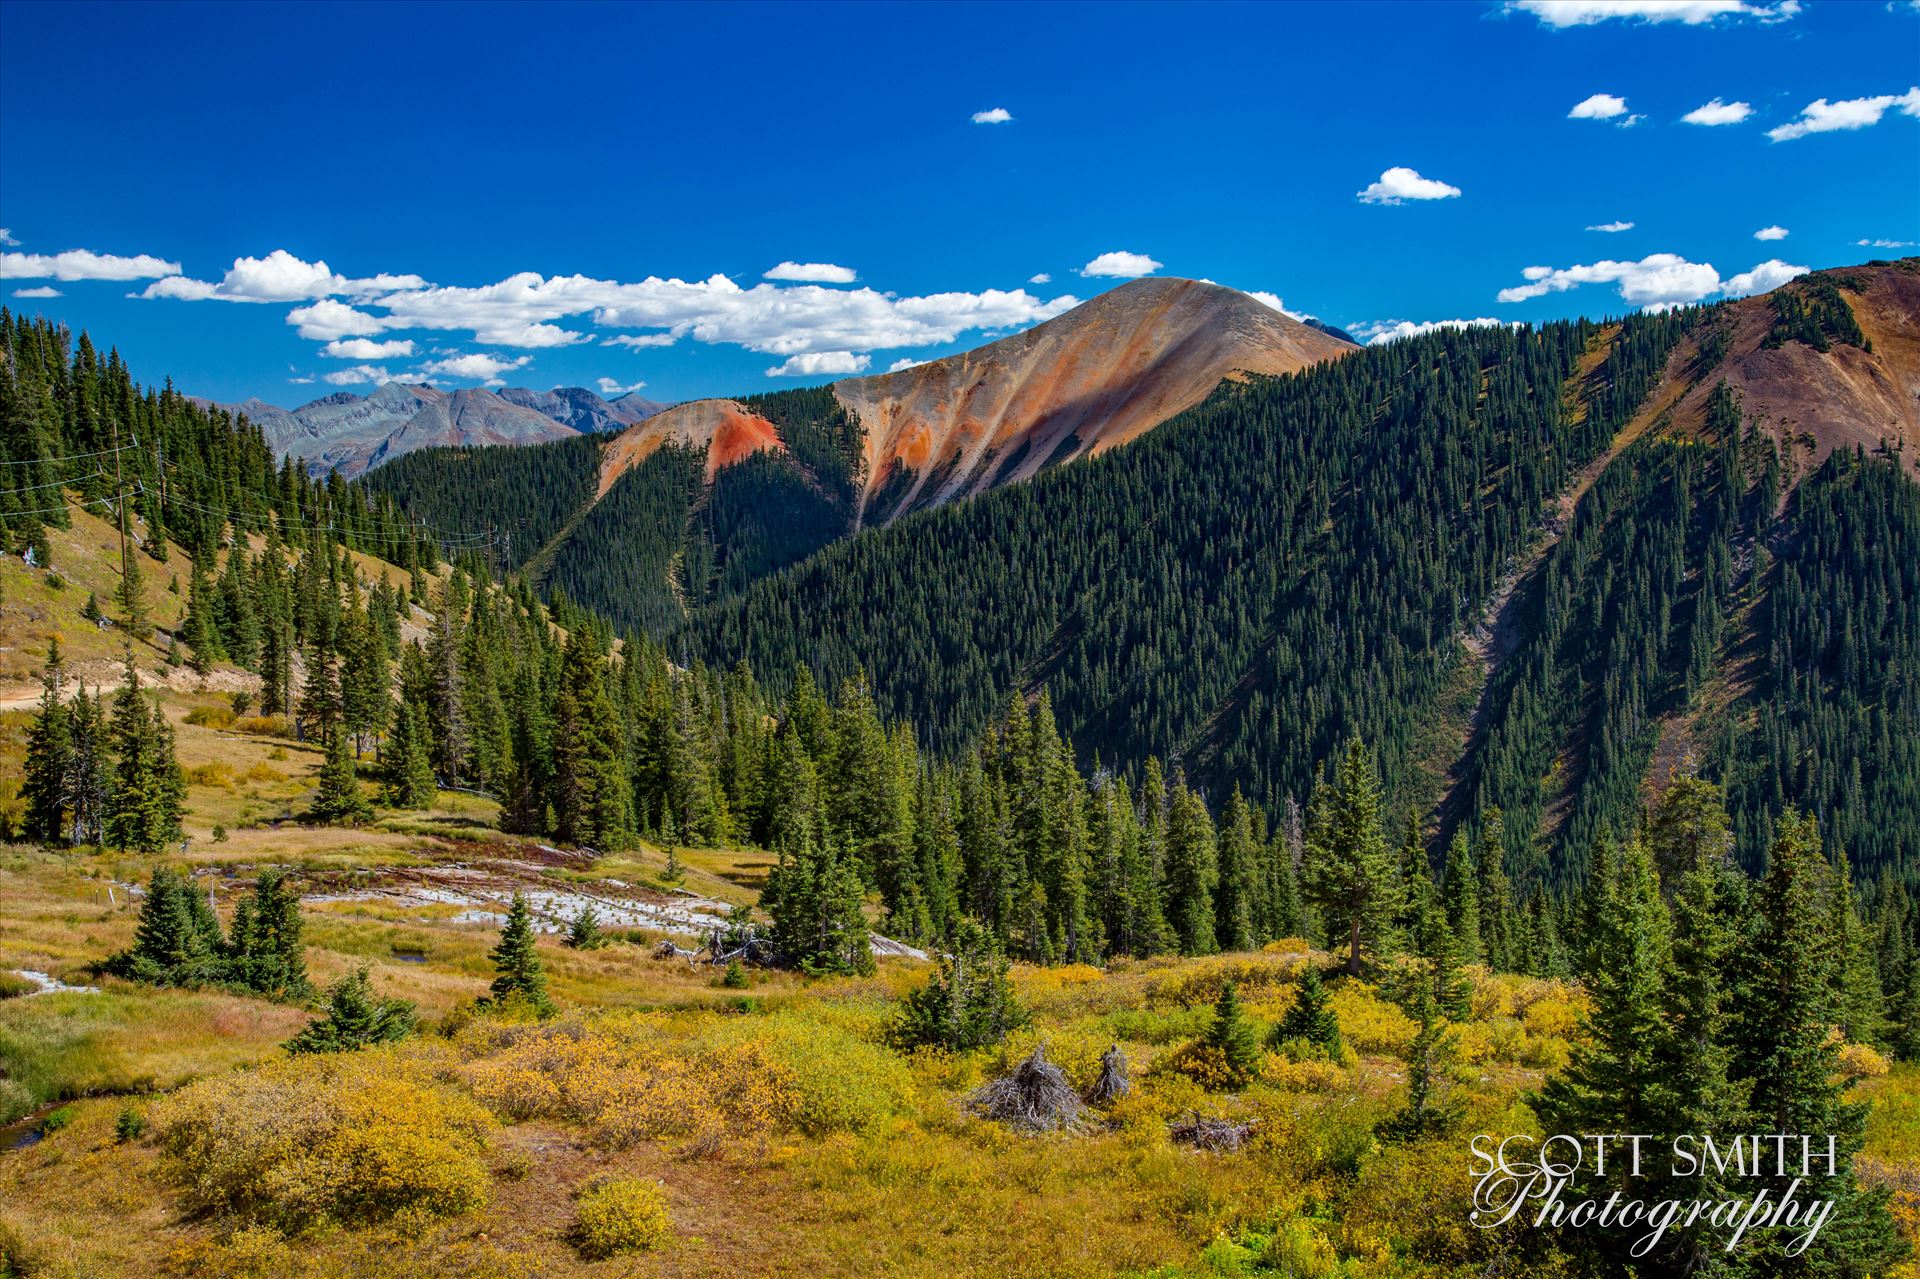 Ophir Pass 5 - Ophir Pass, featuring one of the red mountains, between Ouray and Silverton Colorado in the fall. by Scott Smith Photos